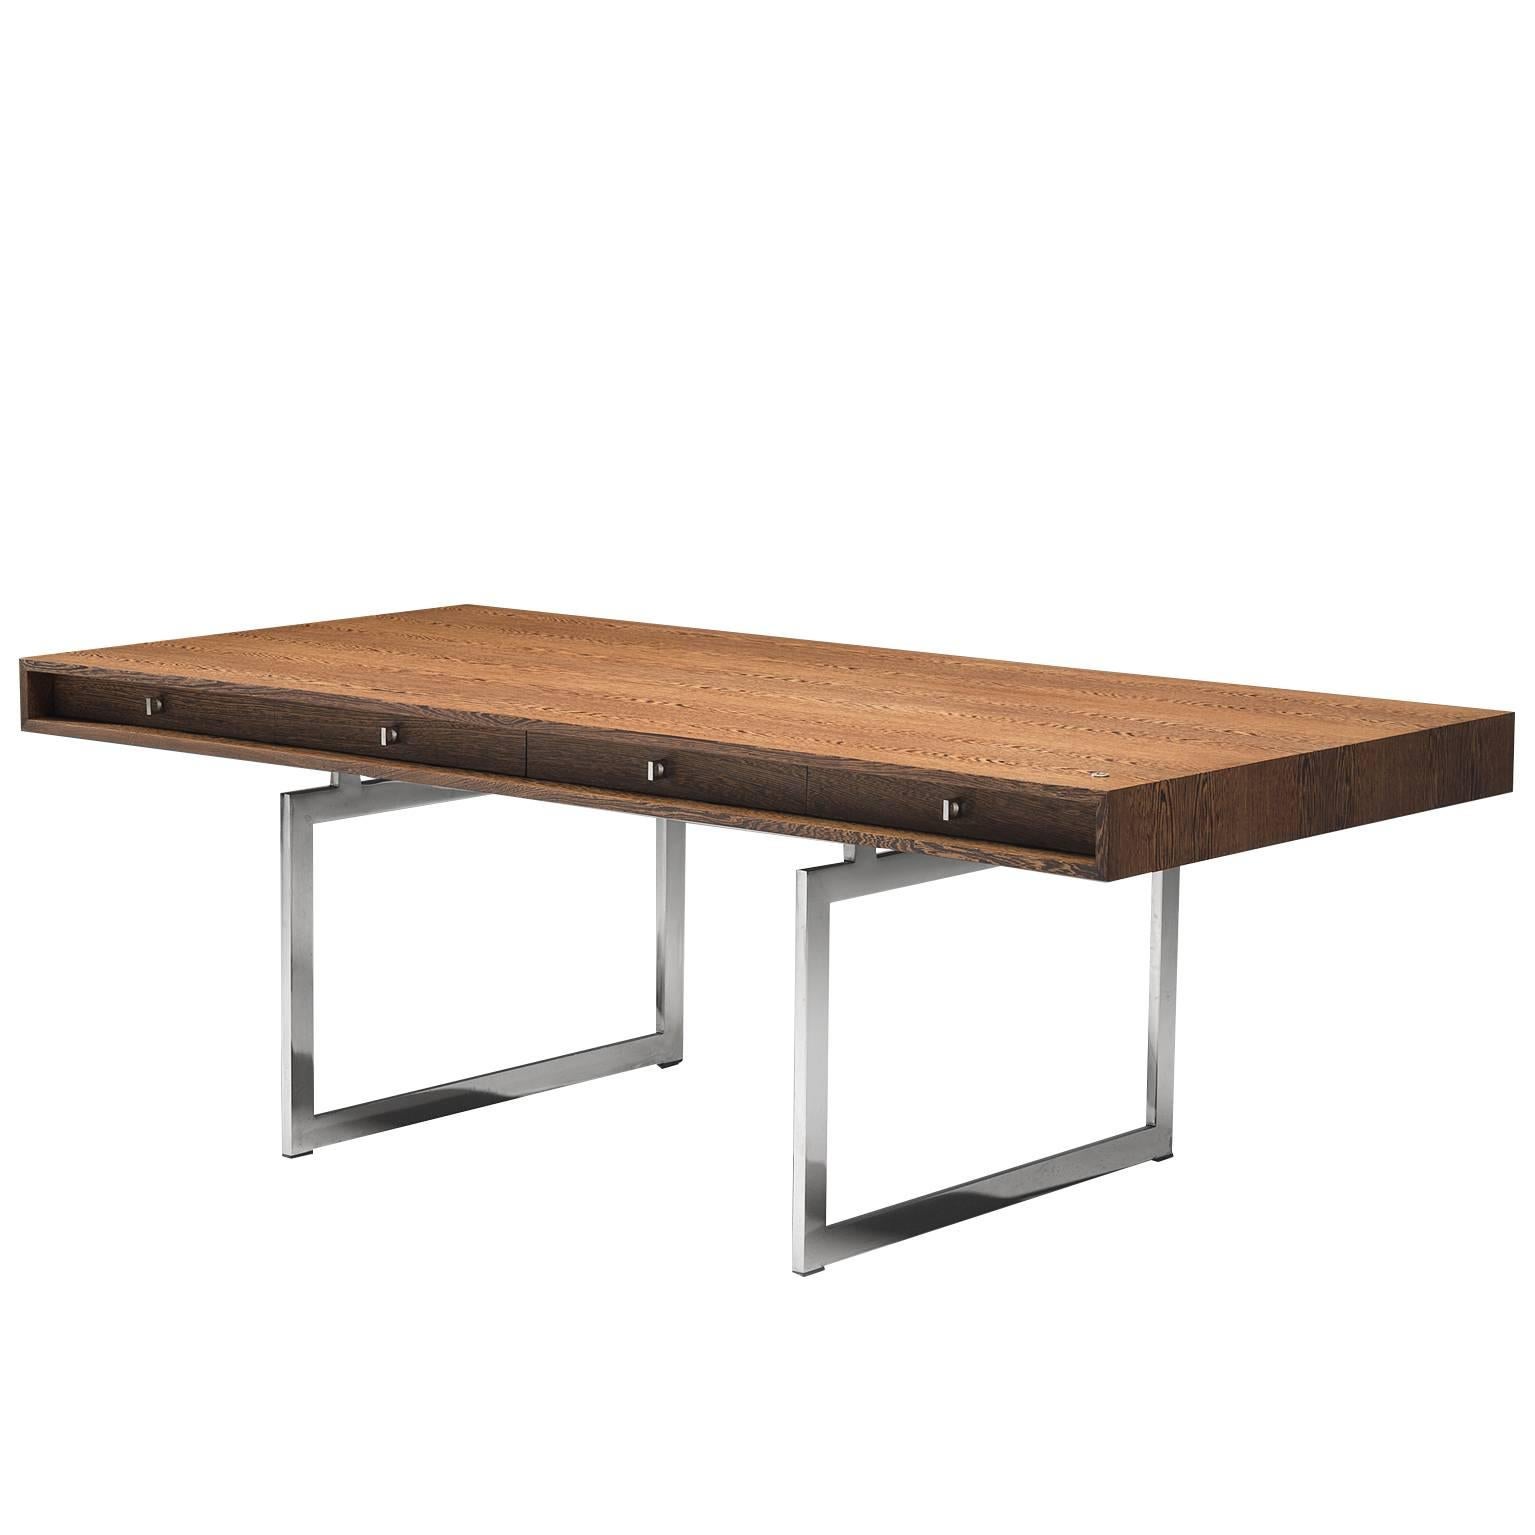 Rare Bodil Kjaer Executive Writing Table in Wenge